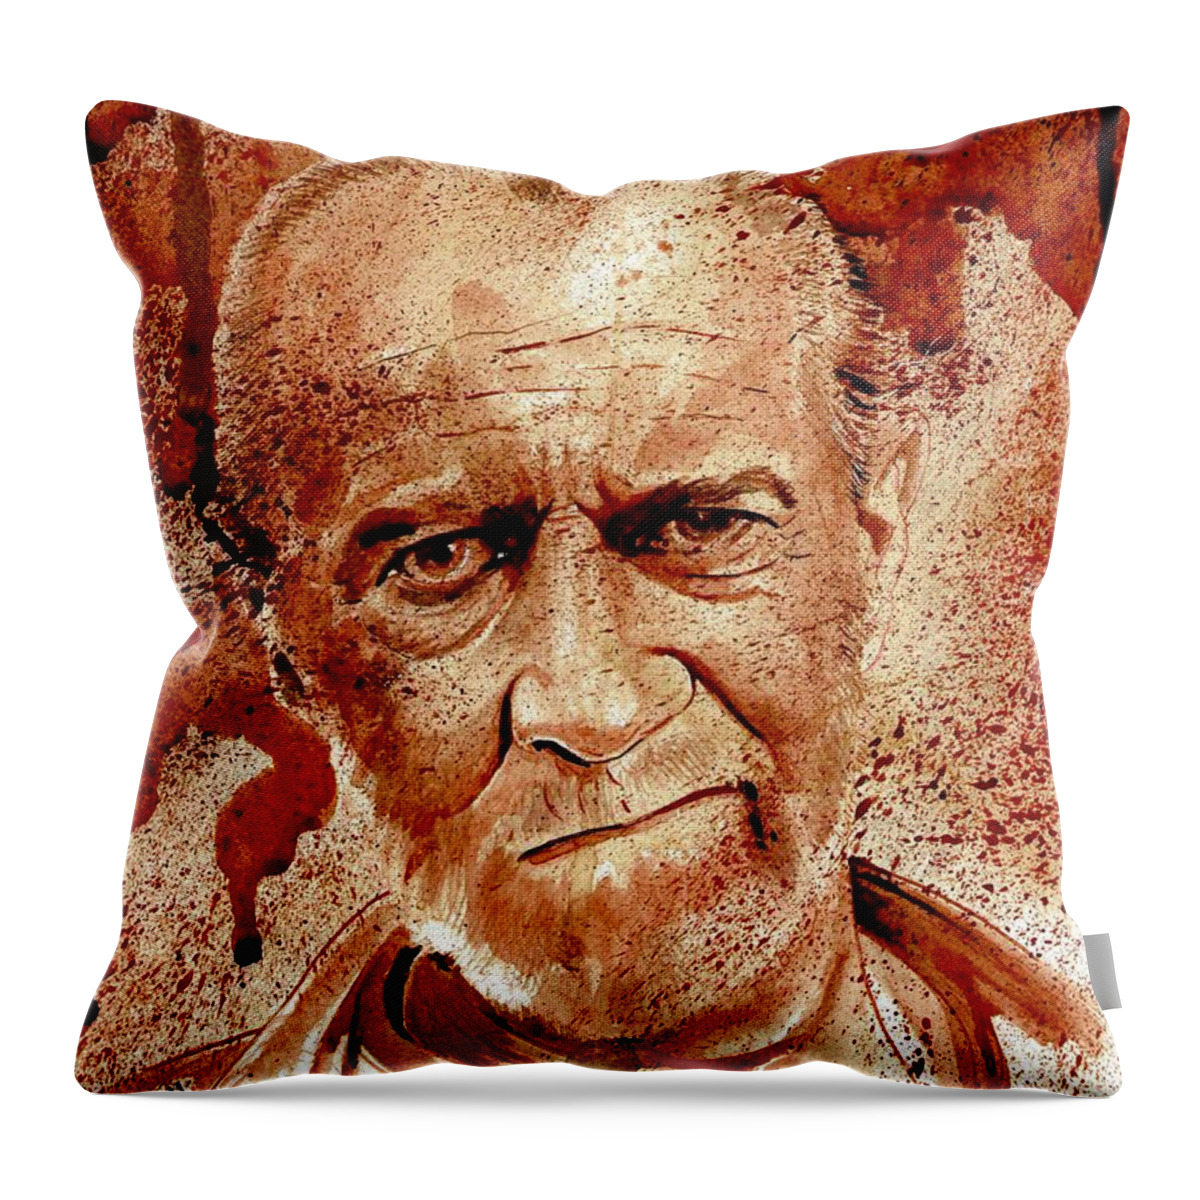 Ryan Almighty Throw Pillow featuring the painting GEORGE CARLIN dry blood by Ryan Almighty